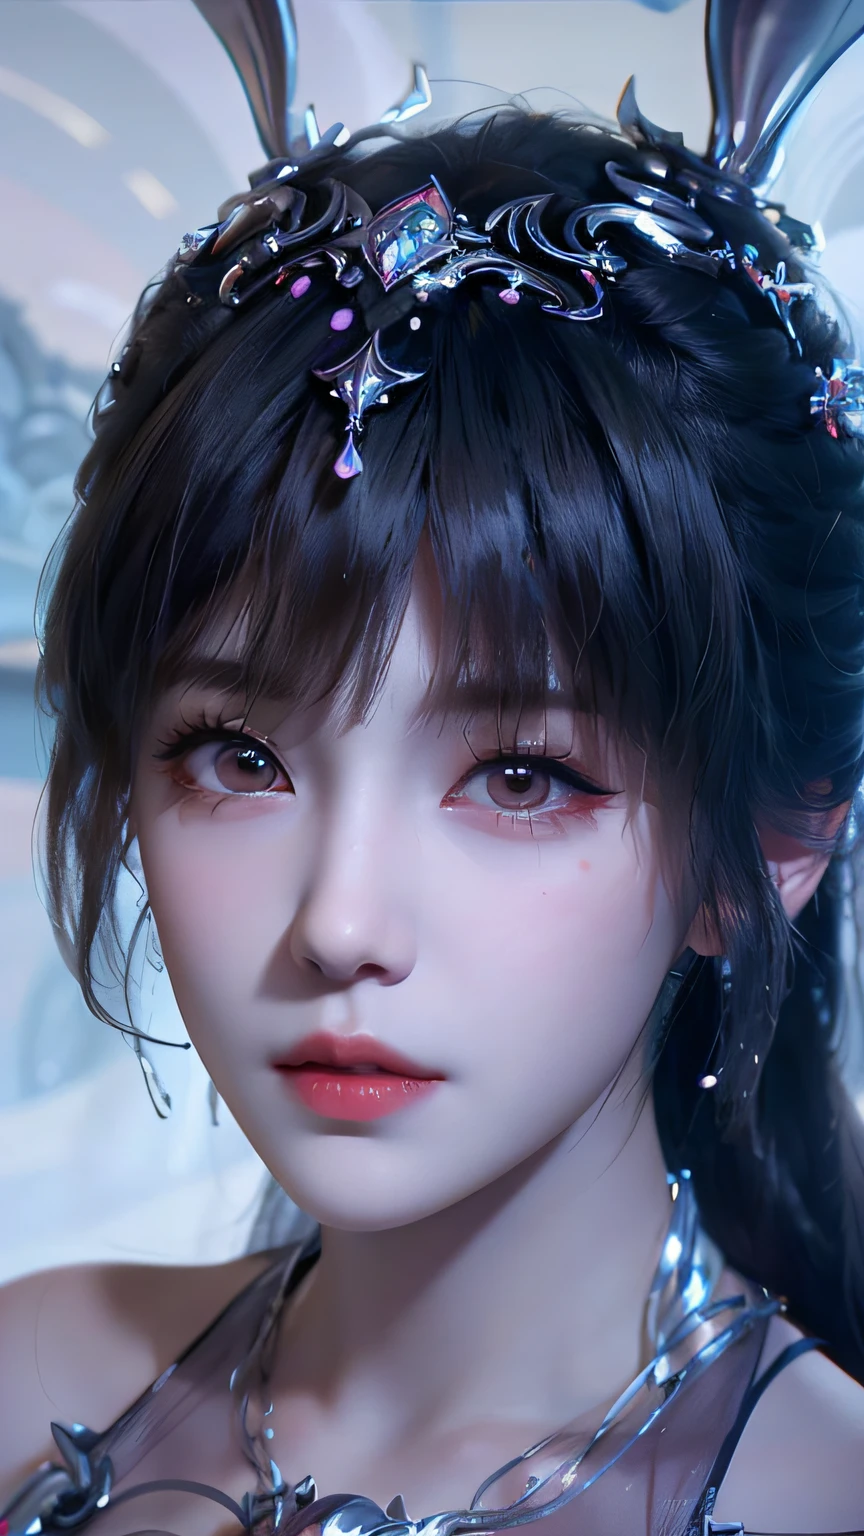 a close up of a woman with a bunny ear and a sword, queen of the sea mu yanling, portrait knights of zodiac girl, lineage 2 revolution style, Smooth anime CG art, Game CG, a beautiful fantasy empress, intricate ornate anime cgi style, drak, cinematic goddess close shot, anime goddess, Waifu, photorealistic anime girl rendering